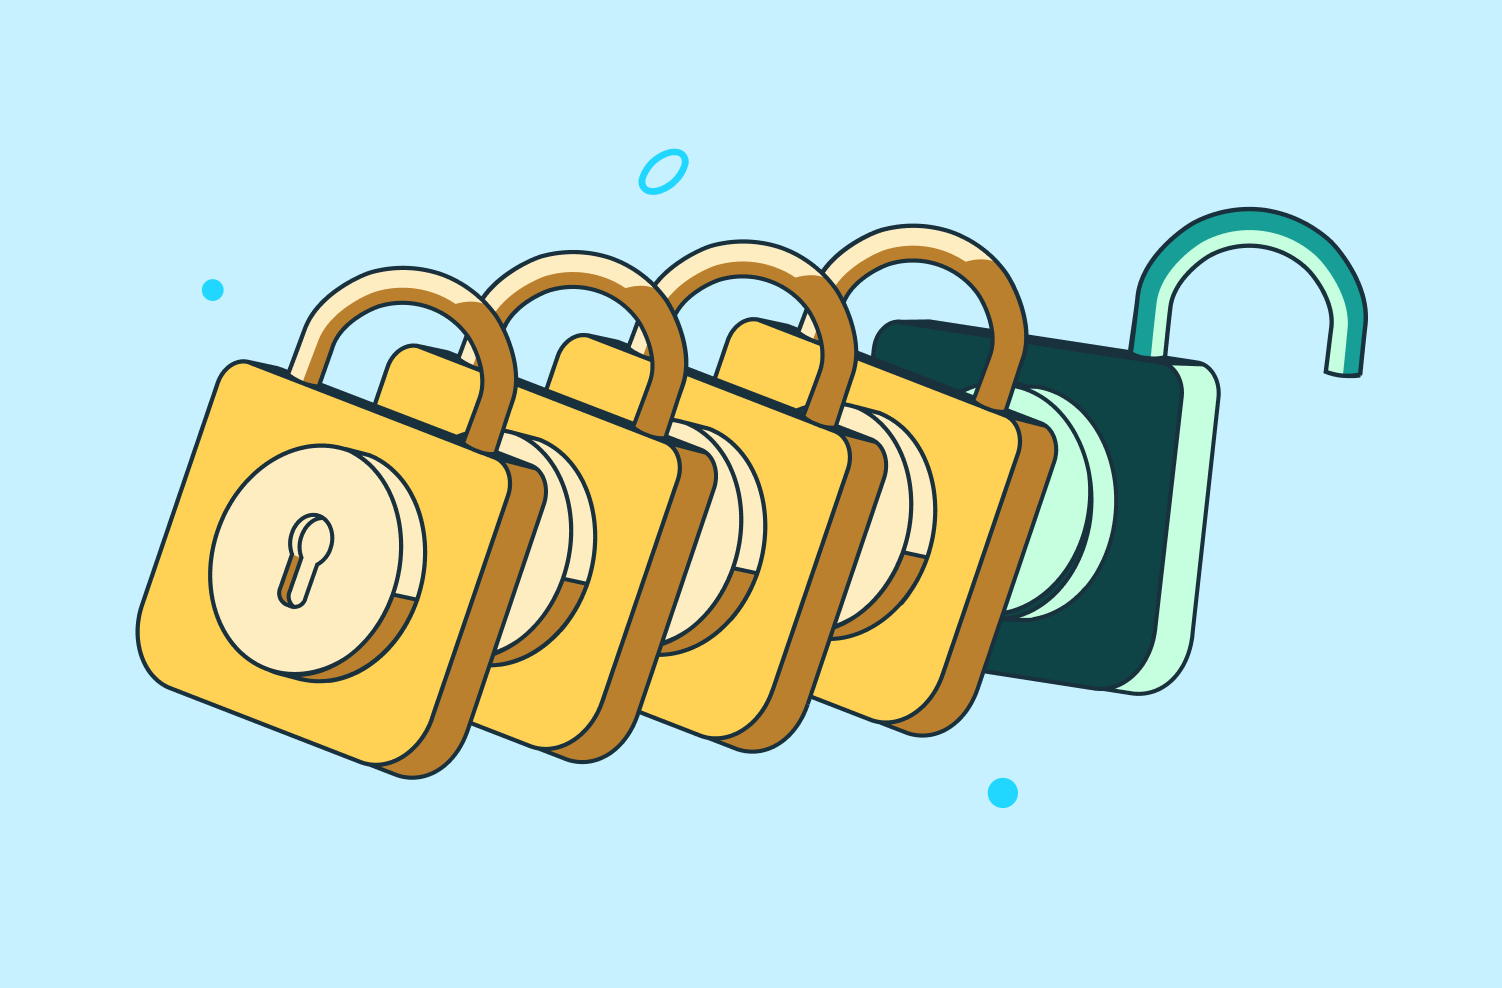 A series of locks finally unlock in the final frame – a metaphor for the power of passwordless authentication